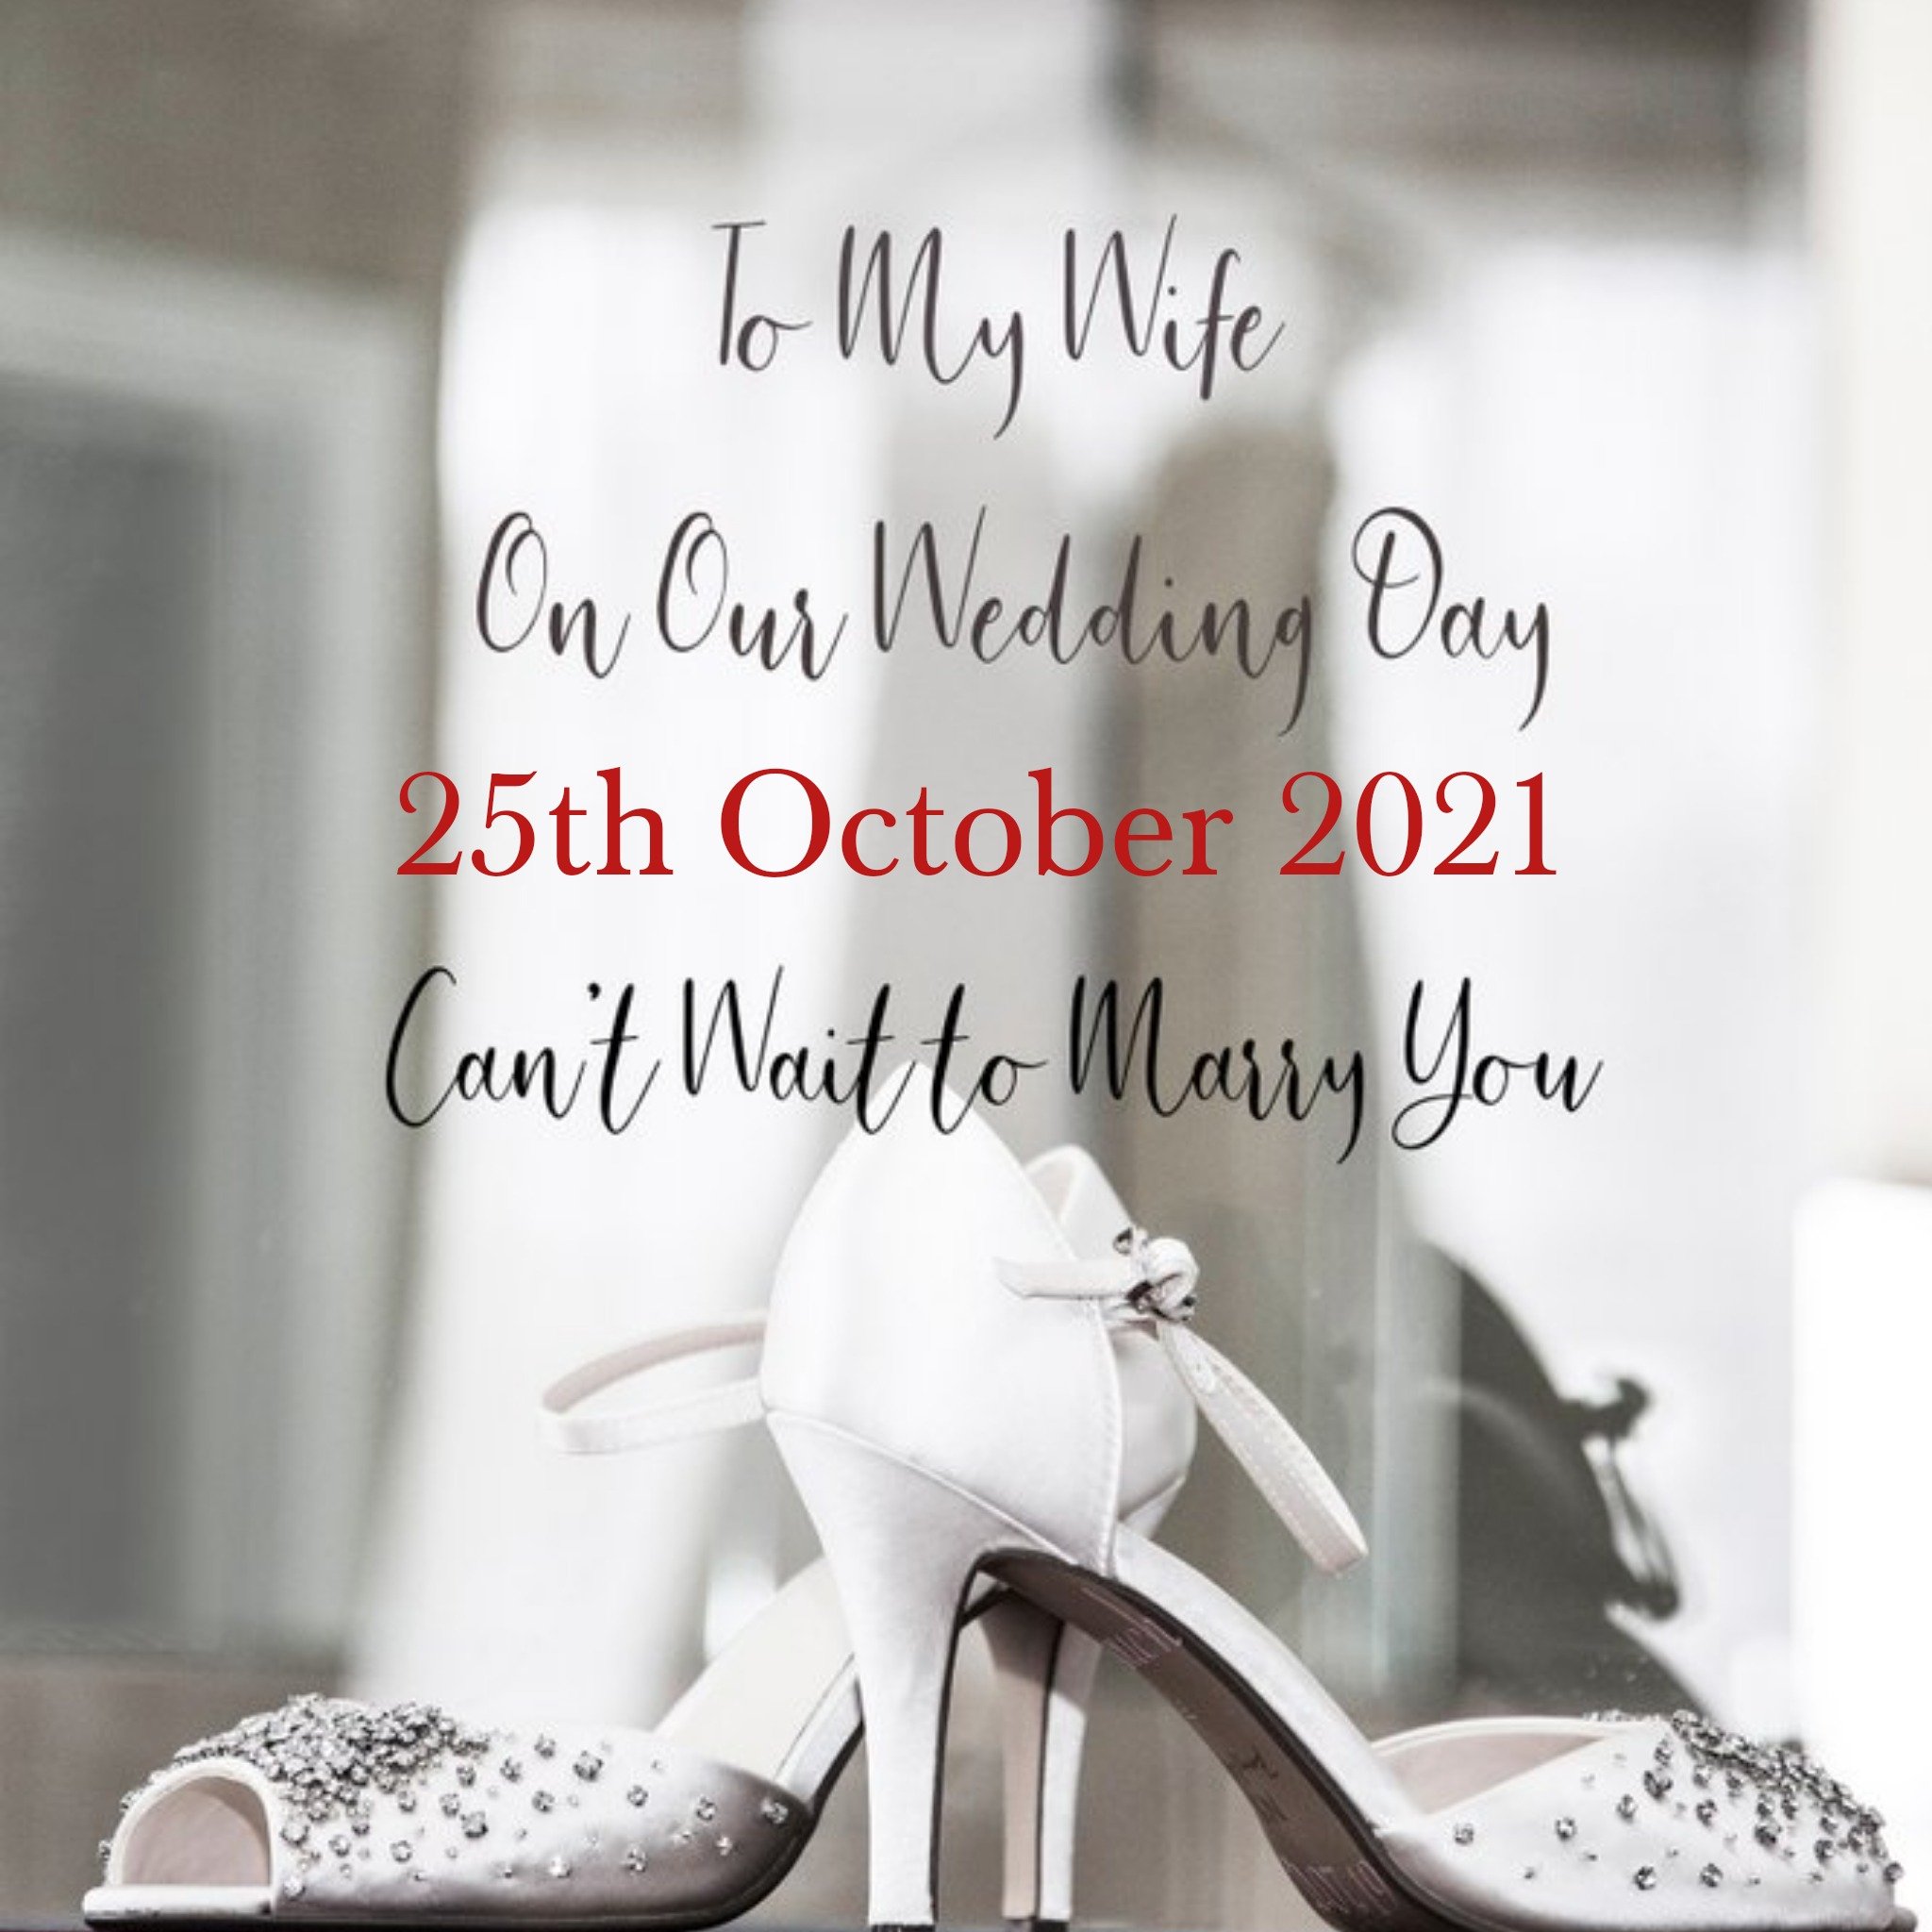 Moonpig Photograph Of Wedding Shoes Can't Wait To Marry You Card, Square